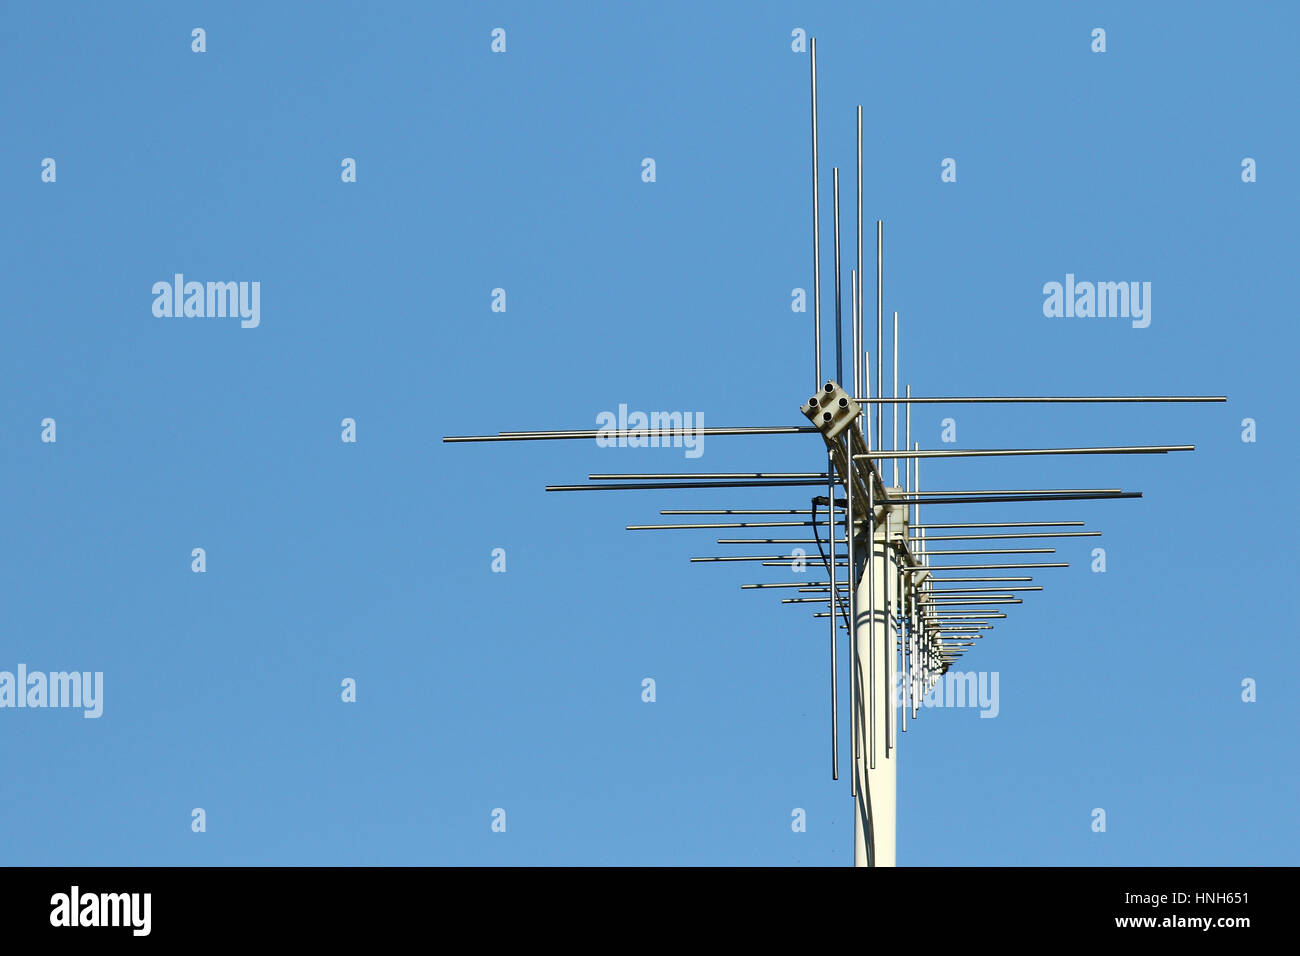 Modern crossed communications antenna stack on metal pole against blue skies with space for copy Stock Photo